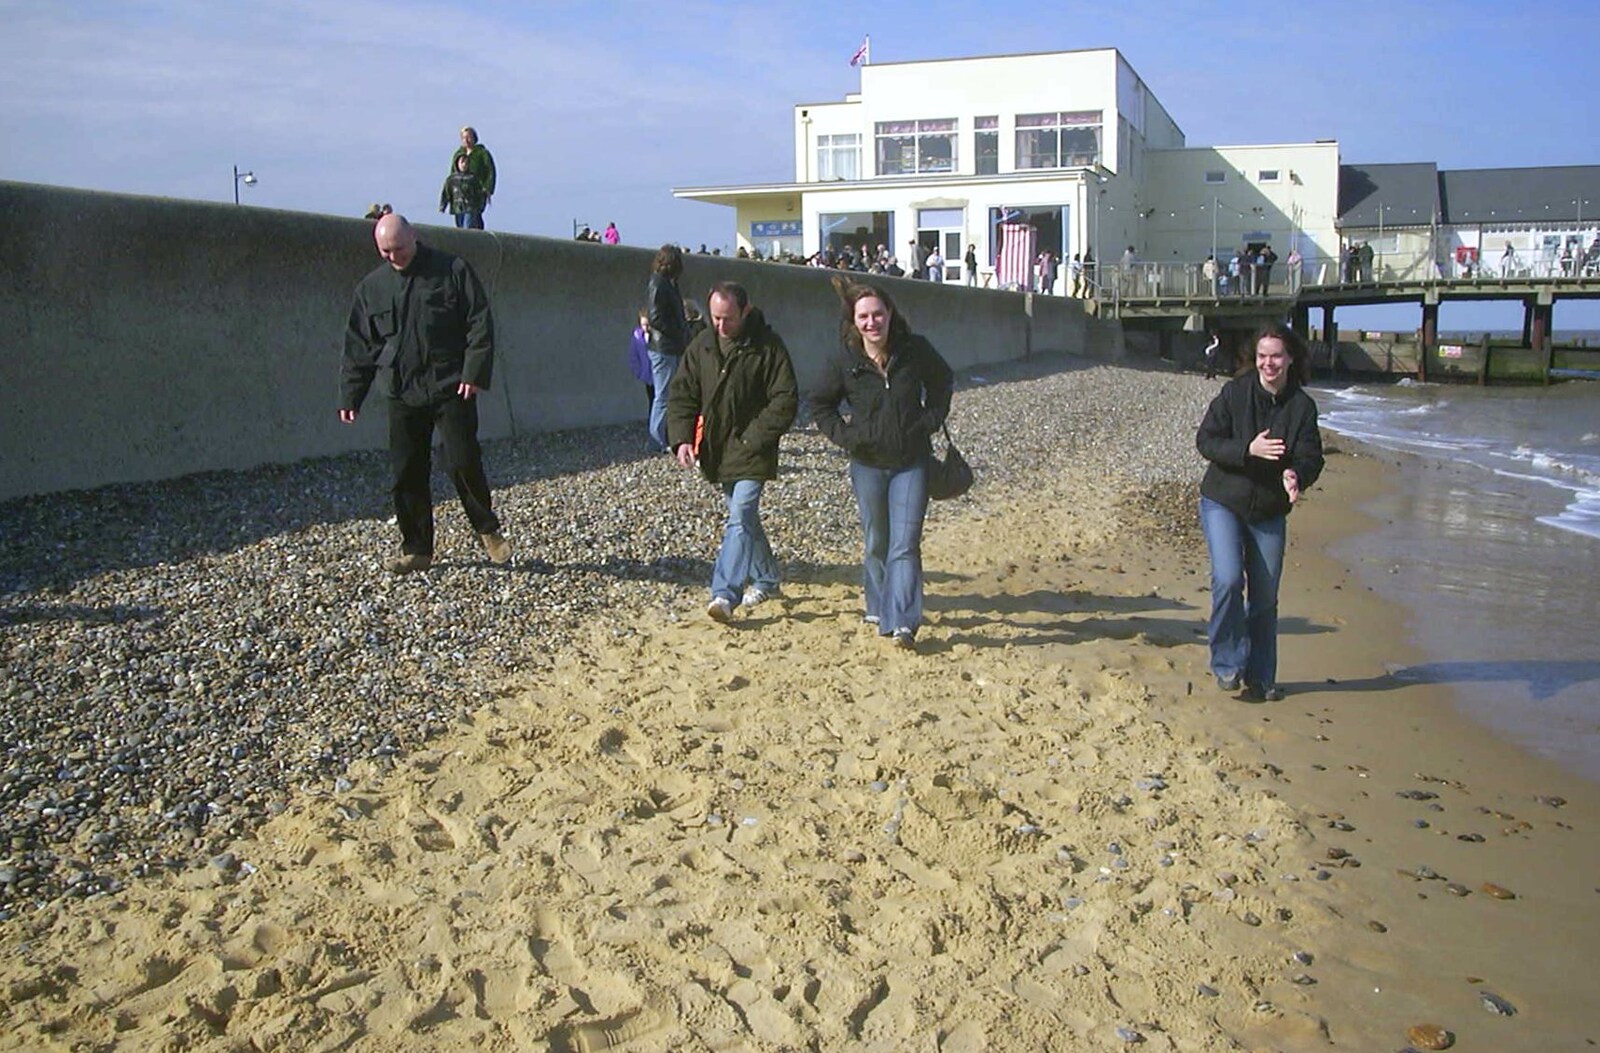 We go for a walk on the beach from A Trip to Sunny Southwold, Suffolk - 12th April